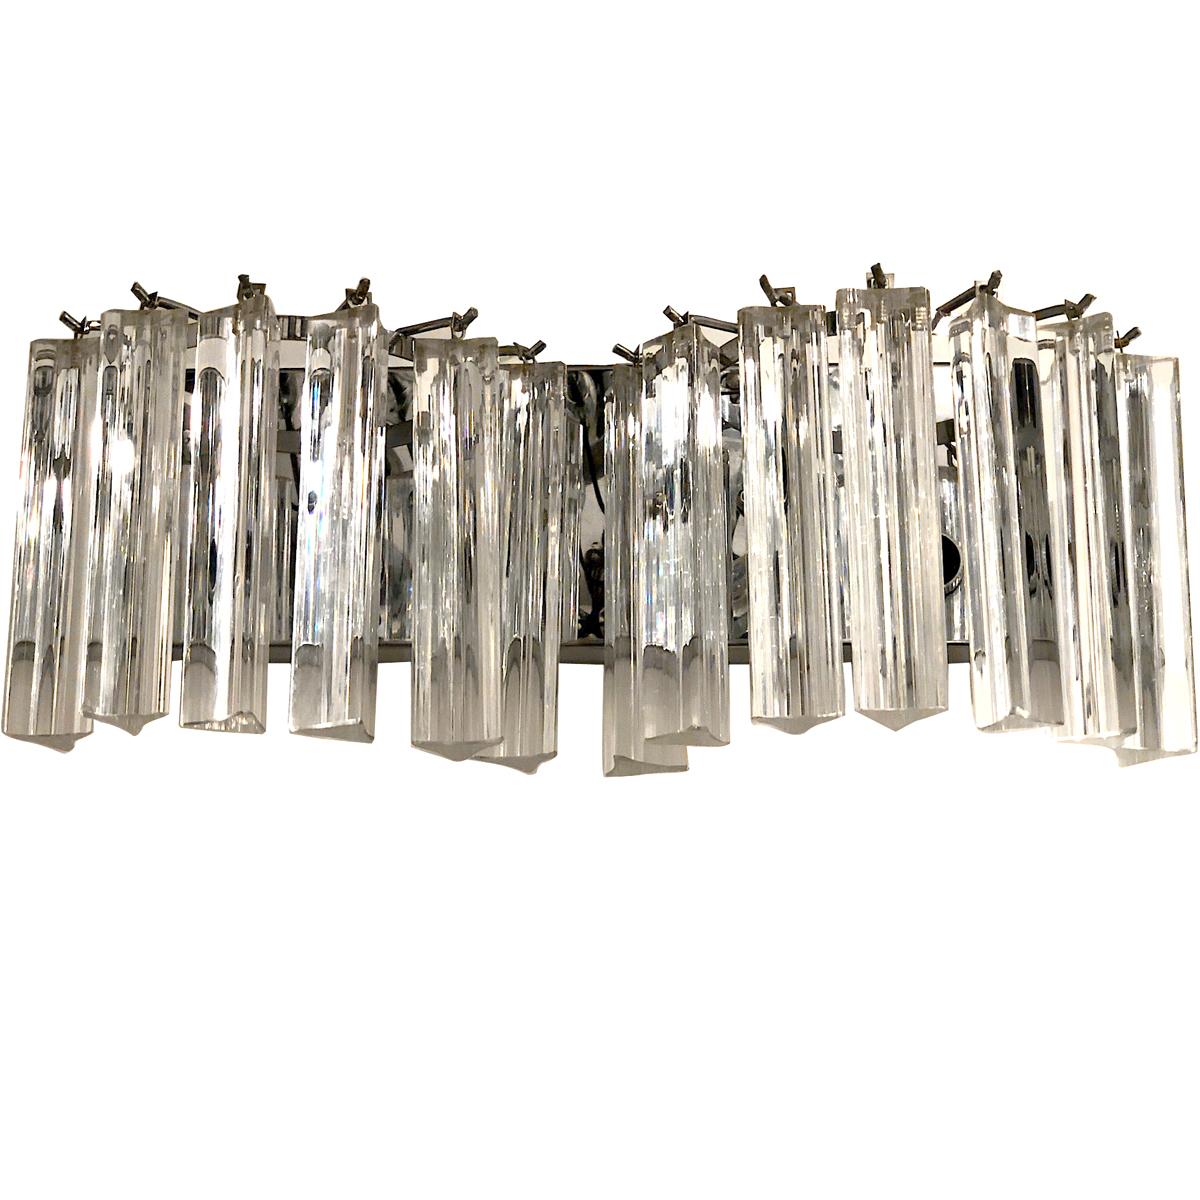 Set of eight circa 1960s Italian triangular Venini glass sconces with four interior lights each. Sold per pair.

Measurements:
Height 6.5